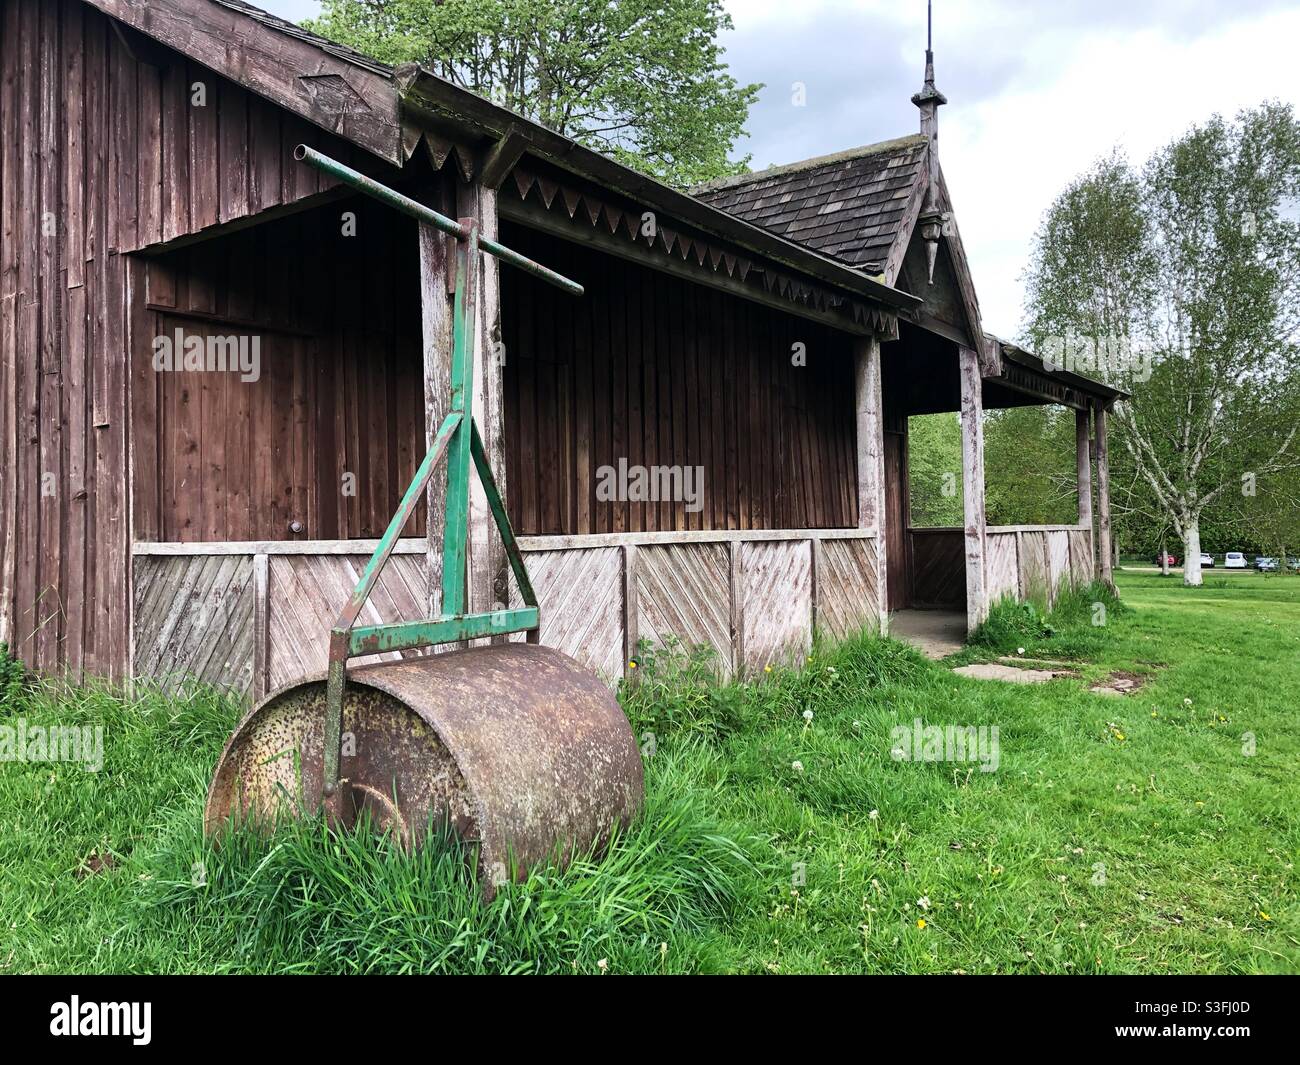 An old traditional cricket pavilion with lawn roller in a typical English countryside setting Stock Photo